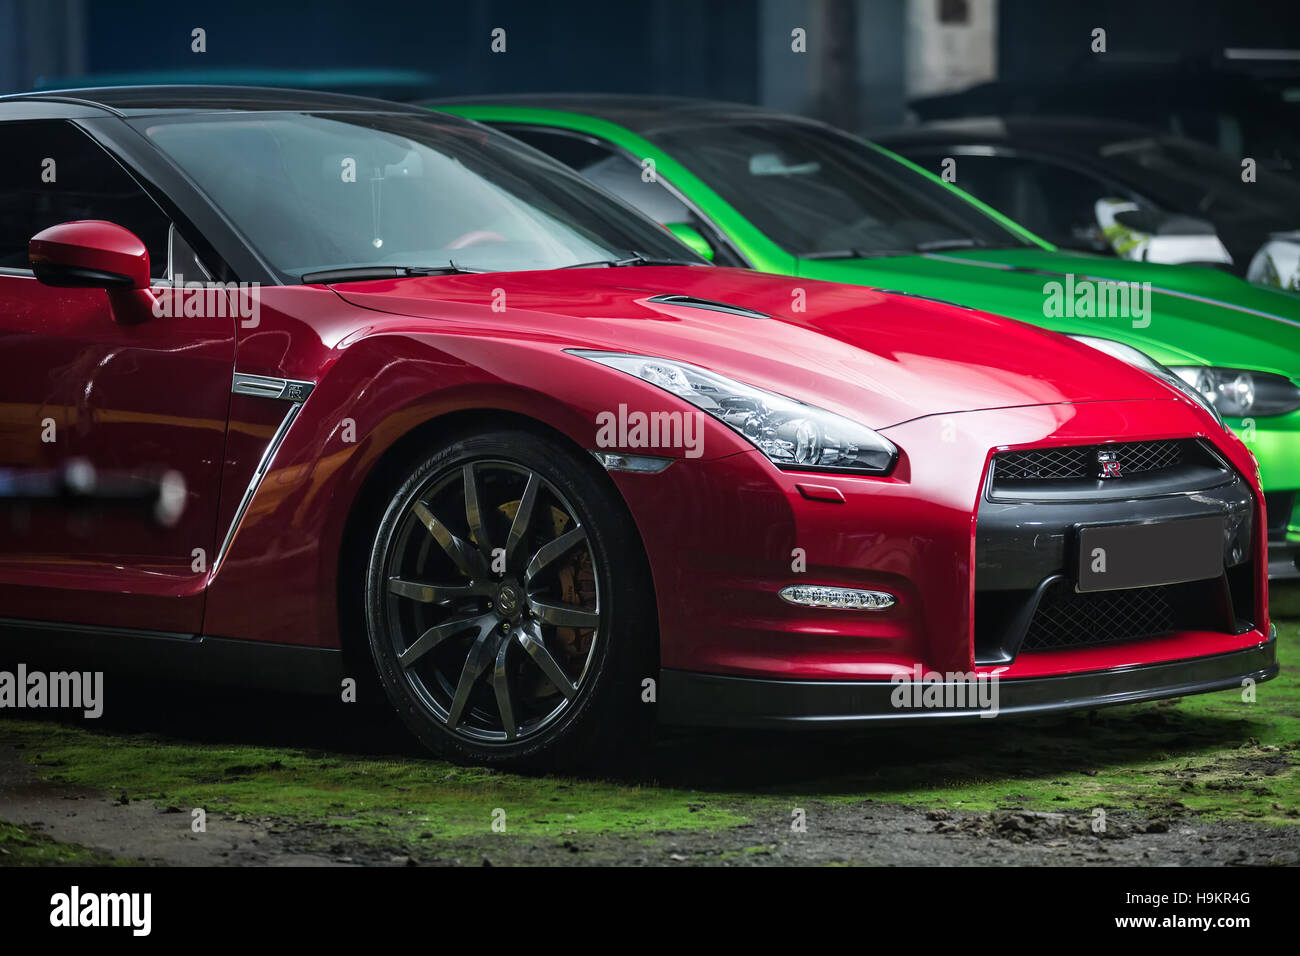 Red-black Nissan GT-R tuning Stock Photo